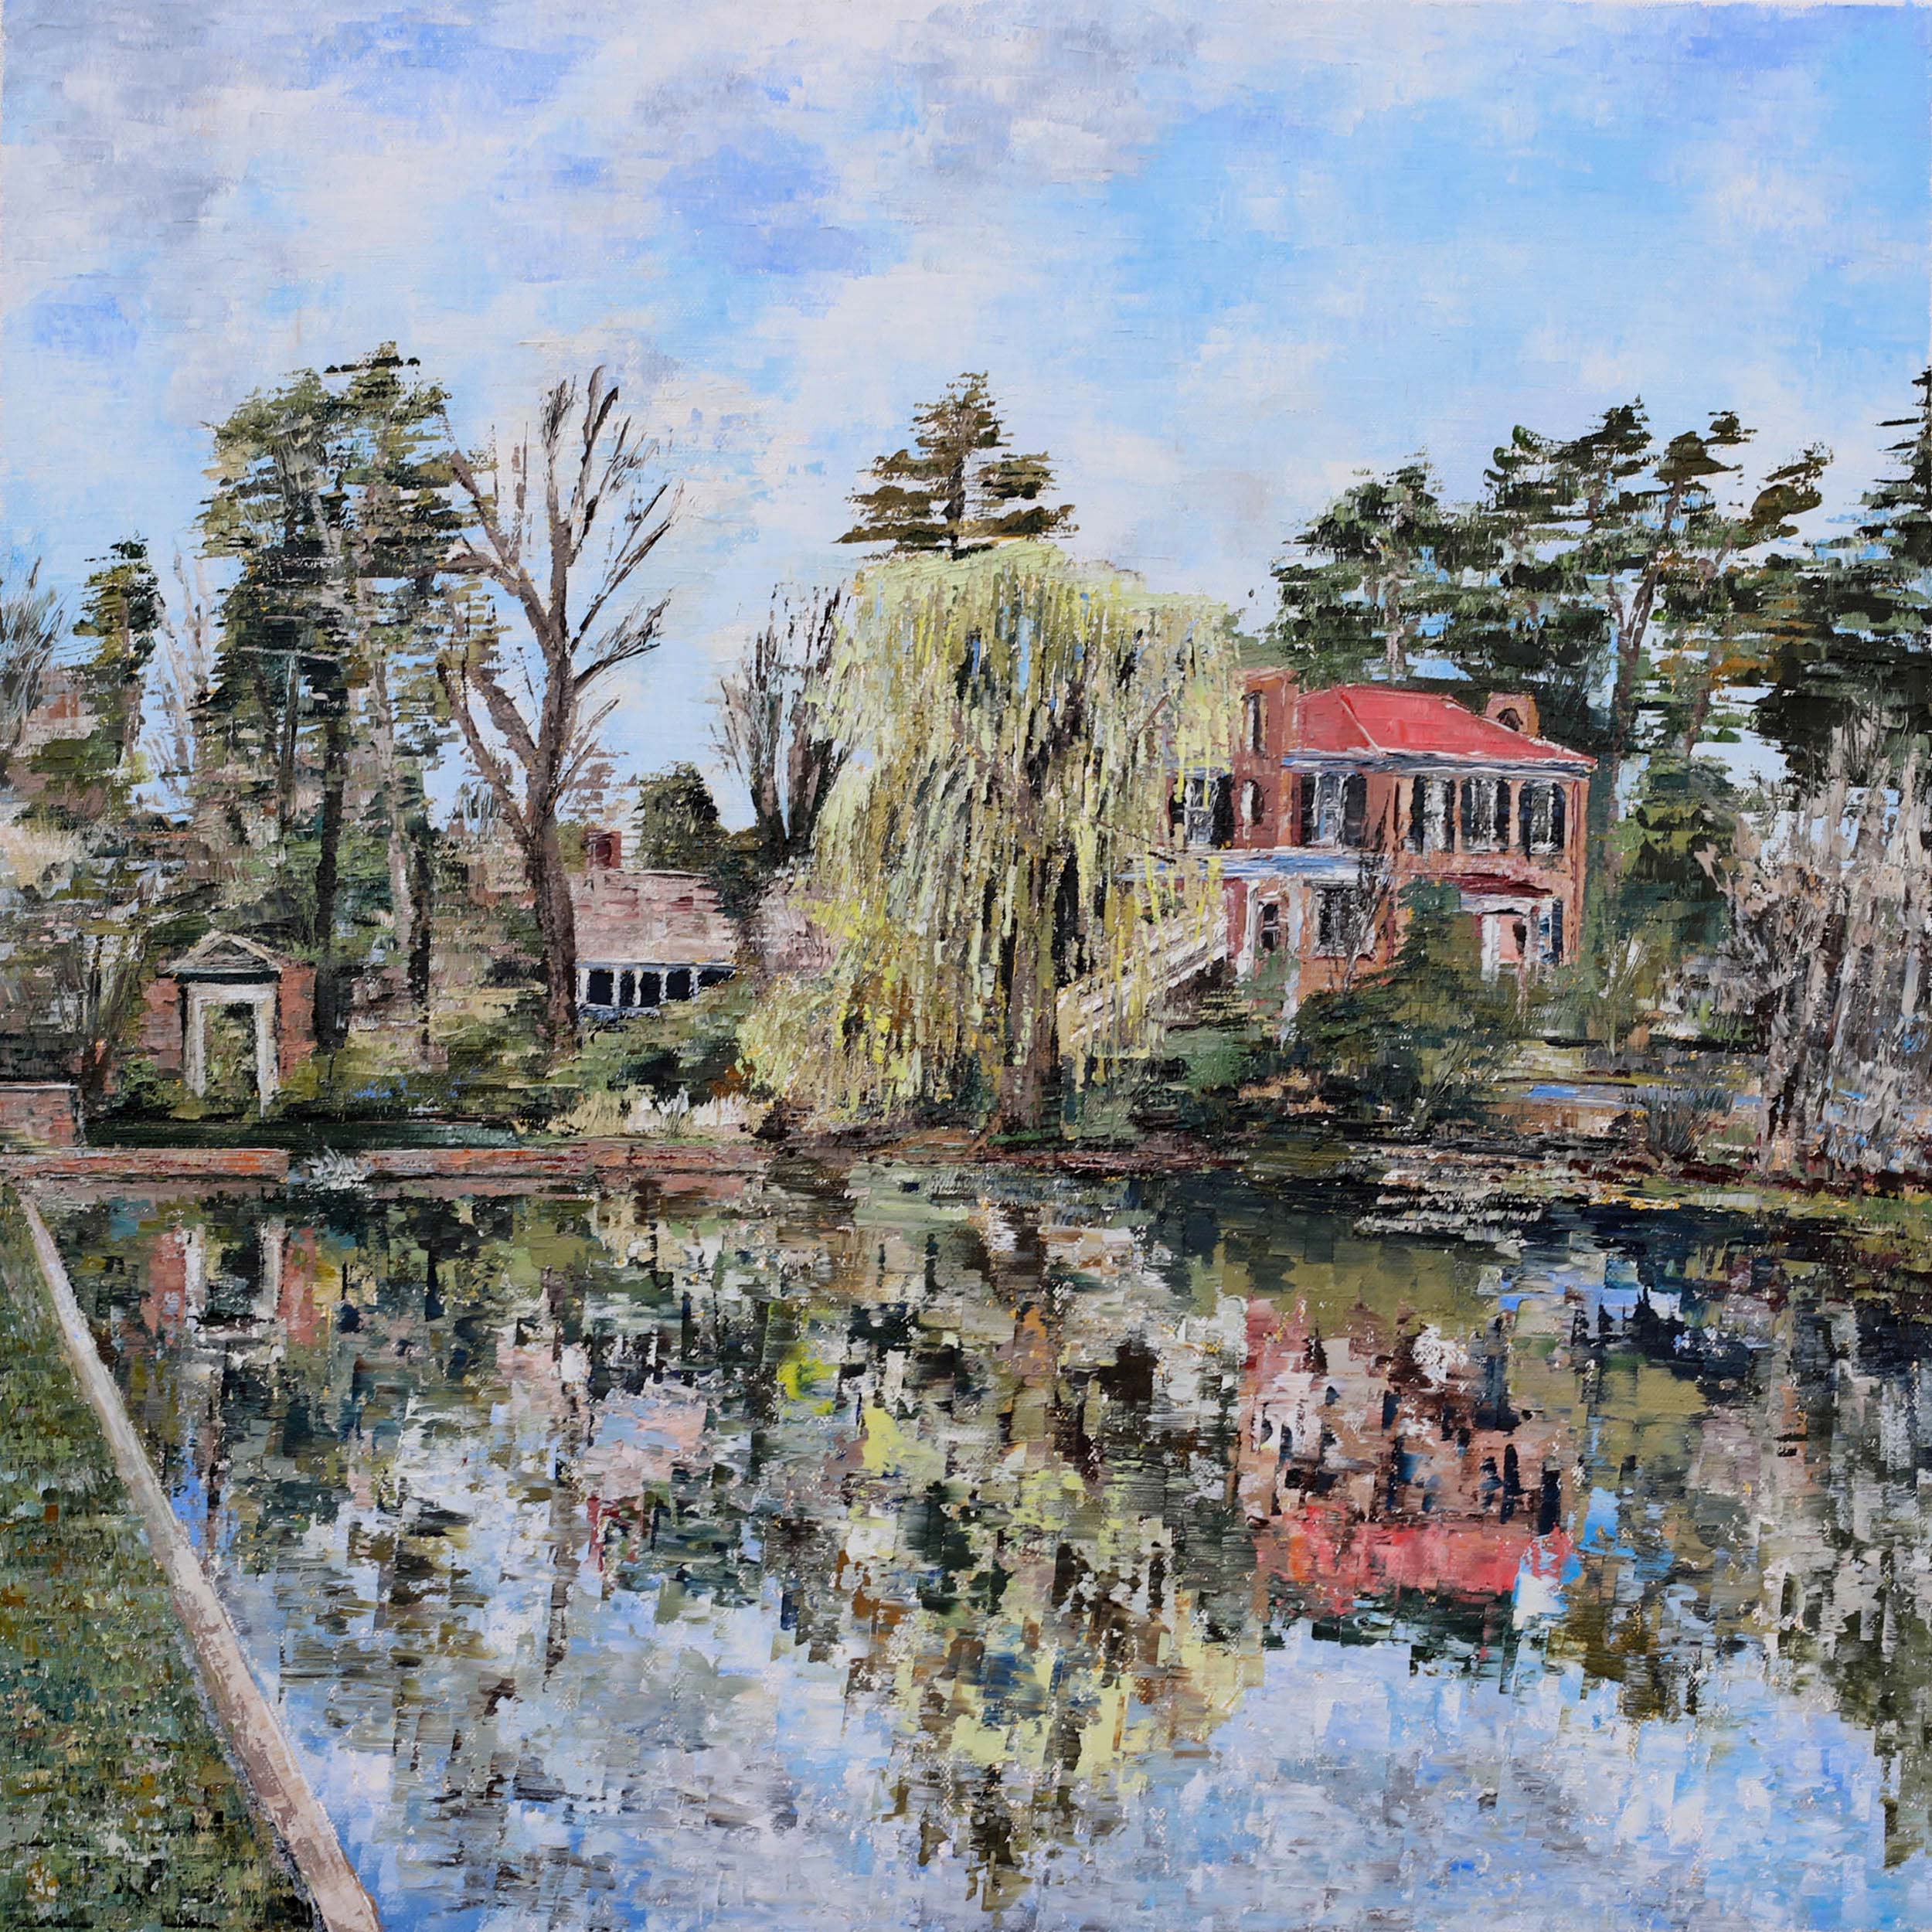 painting called ”Willow on Dell Pond,” is a willow tree overlooking a pond